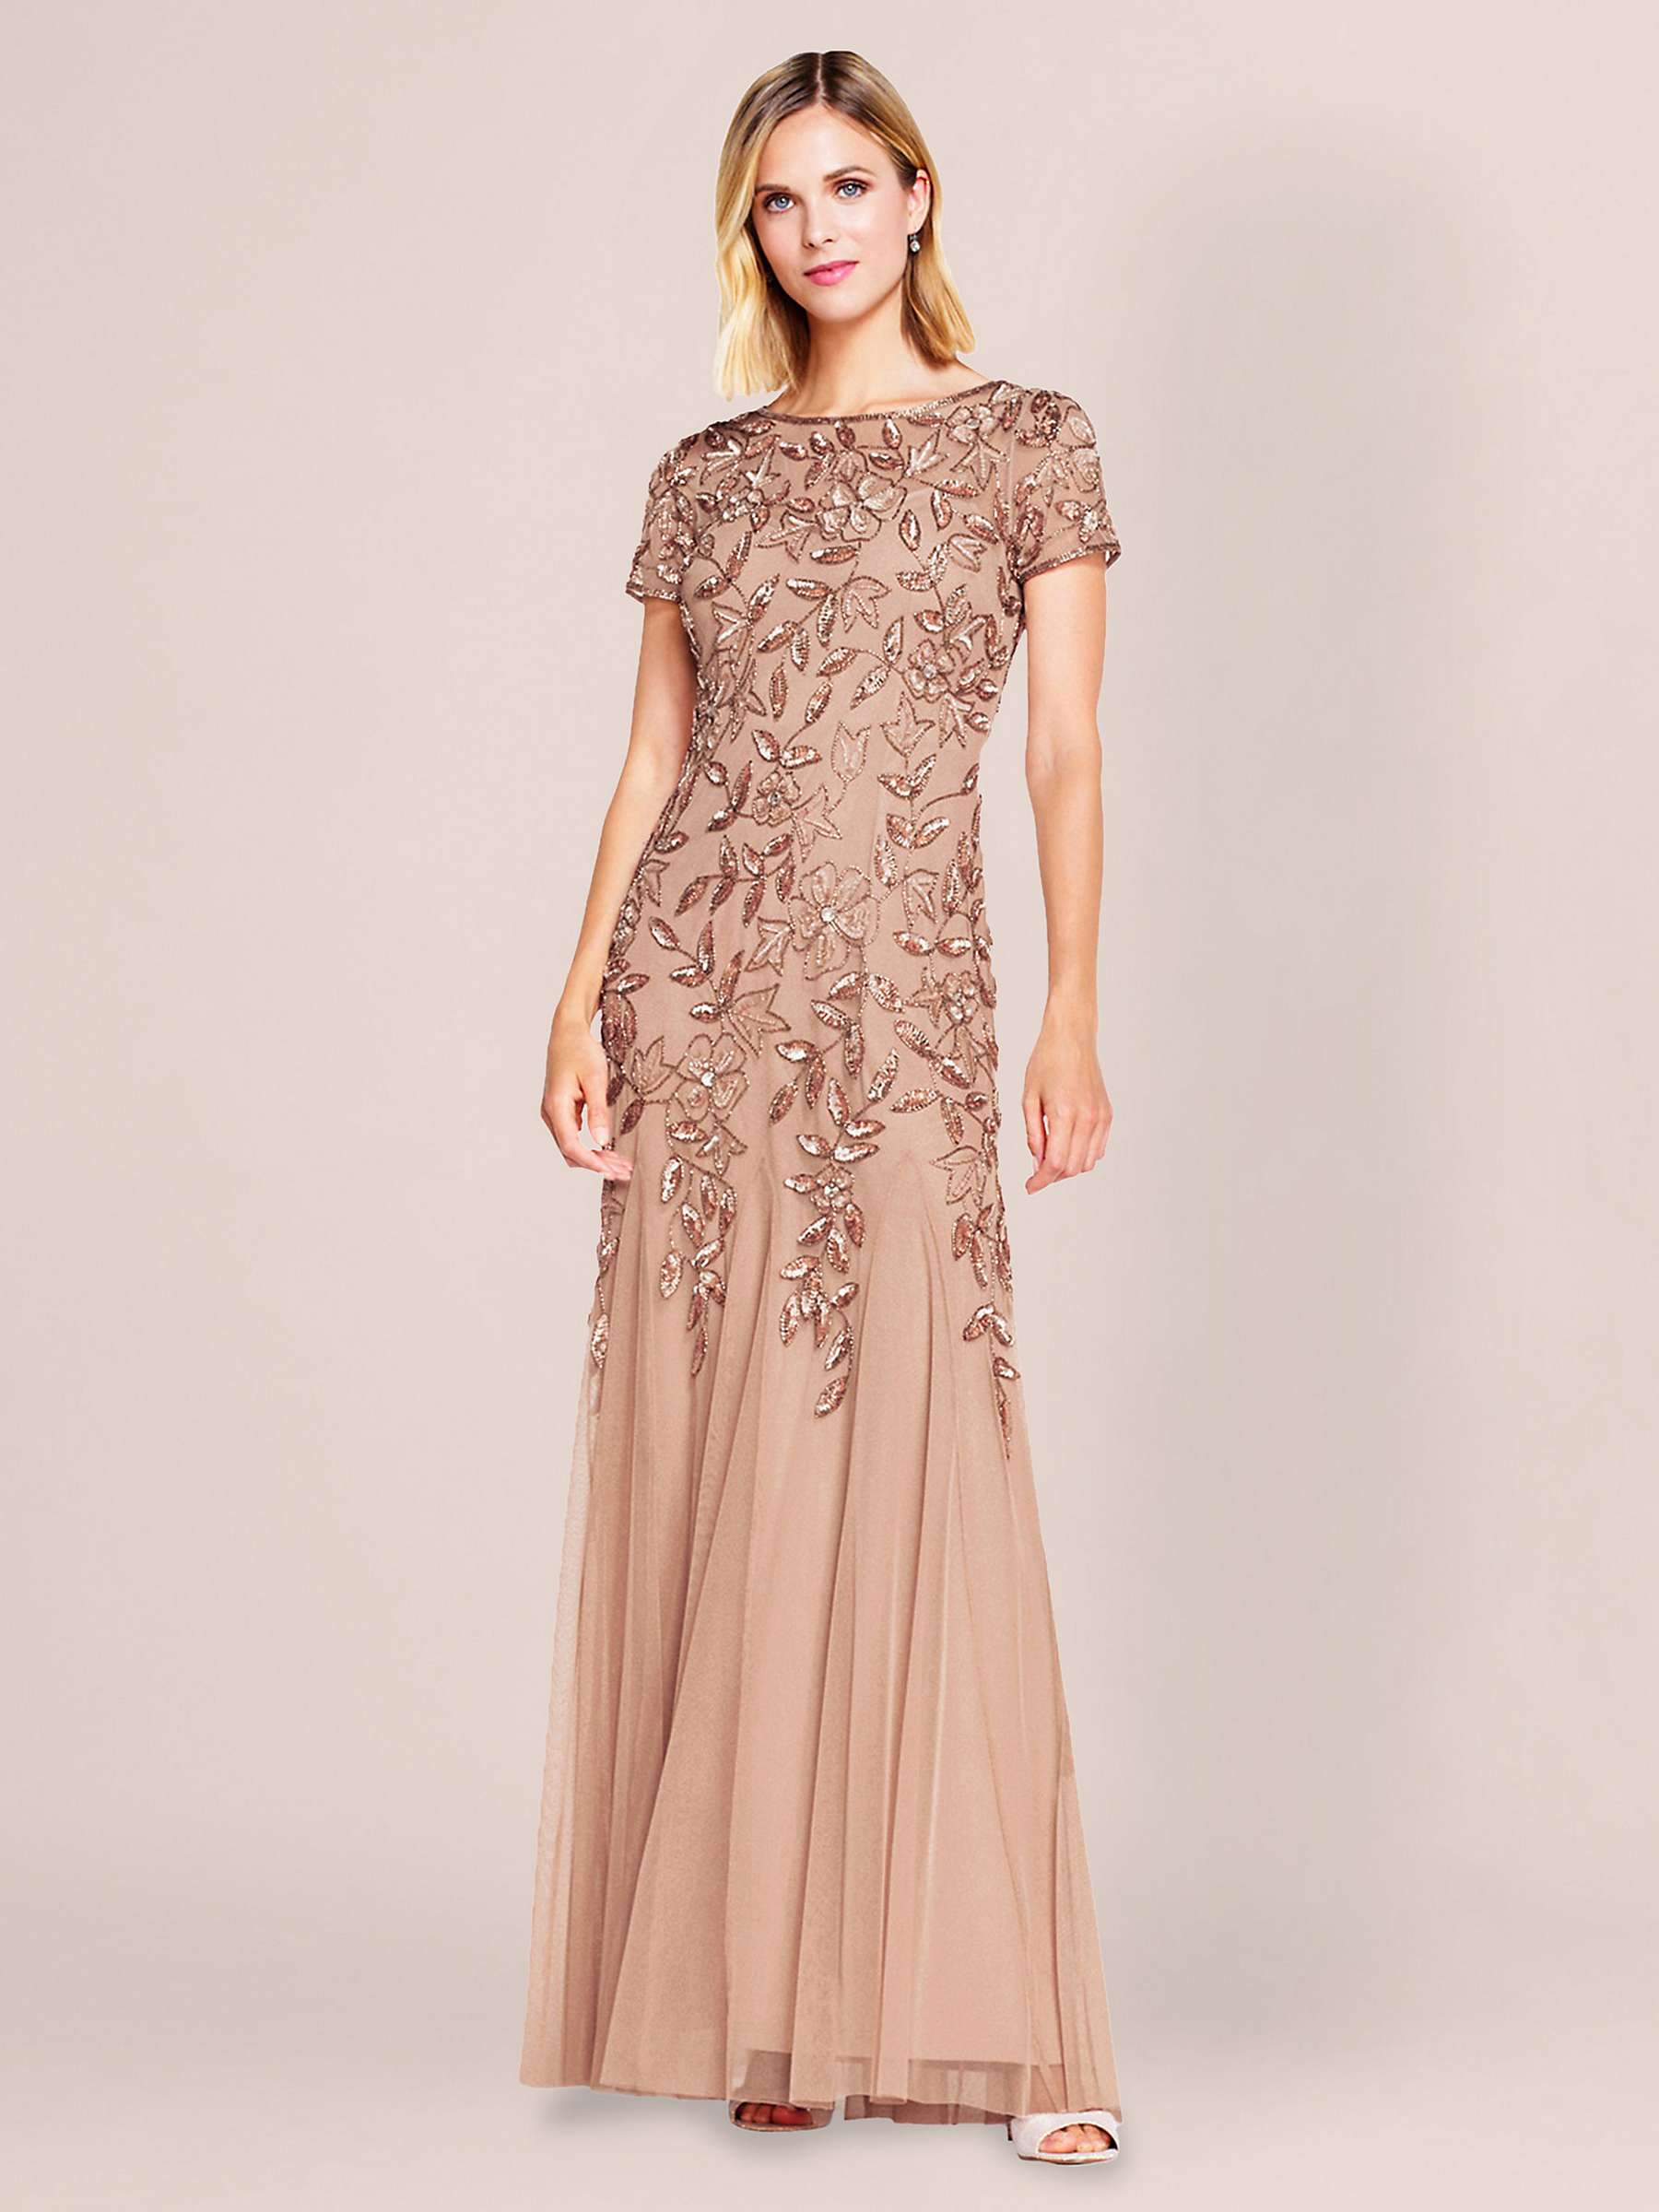 Buy Adrianna Papell Beaded Godets Detail Maxi Dress, Rose Gold Online at johnlewis.com